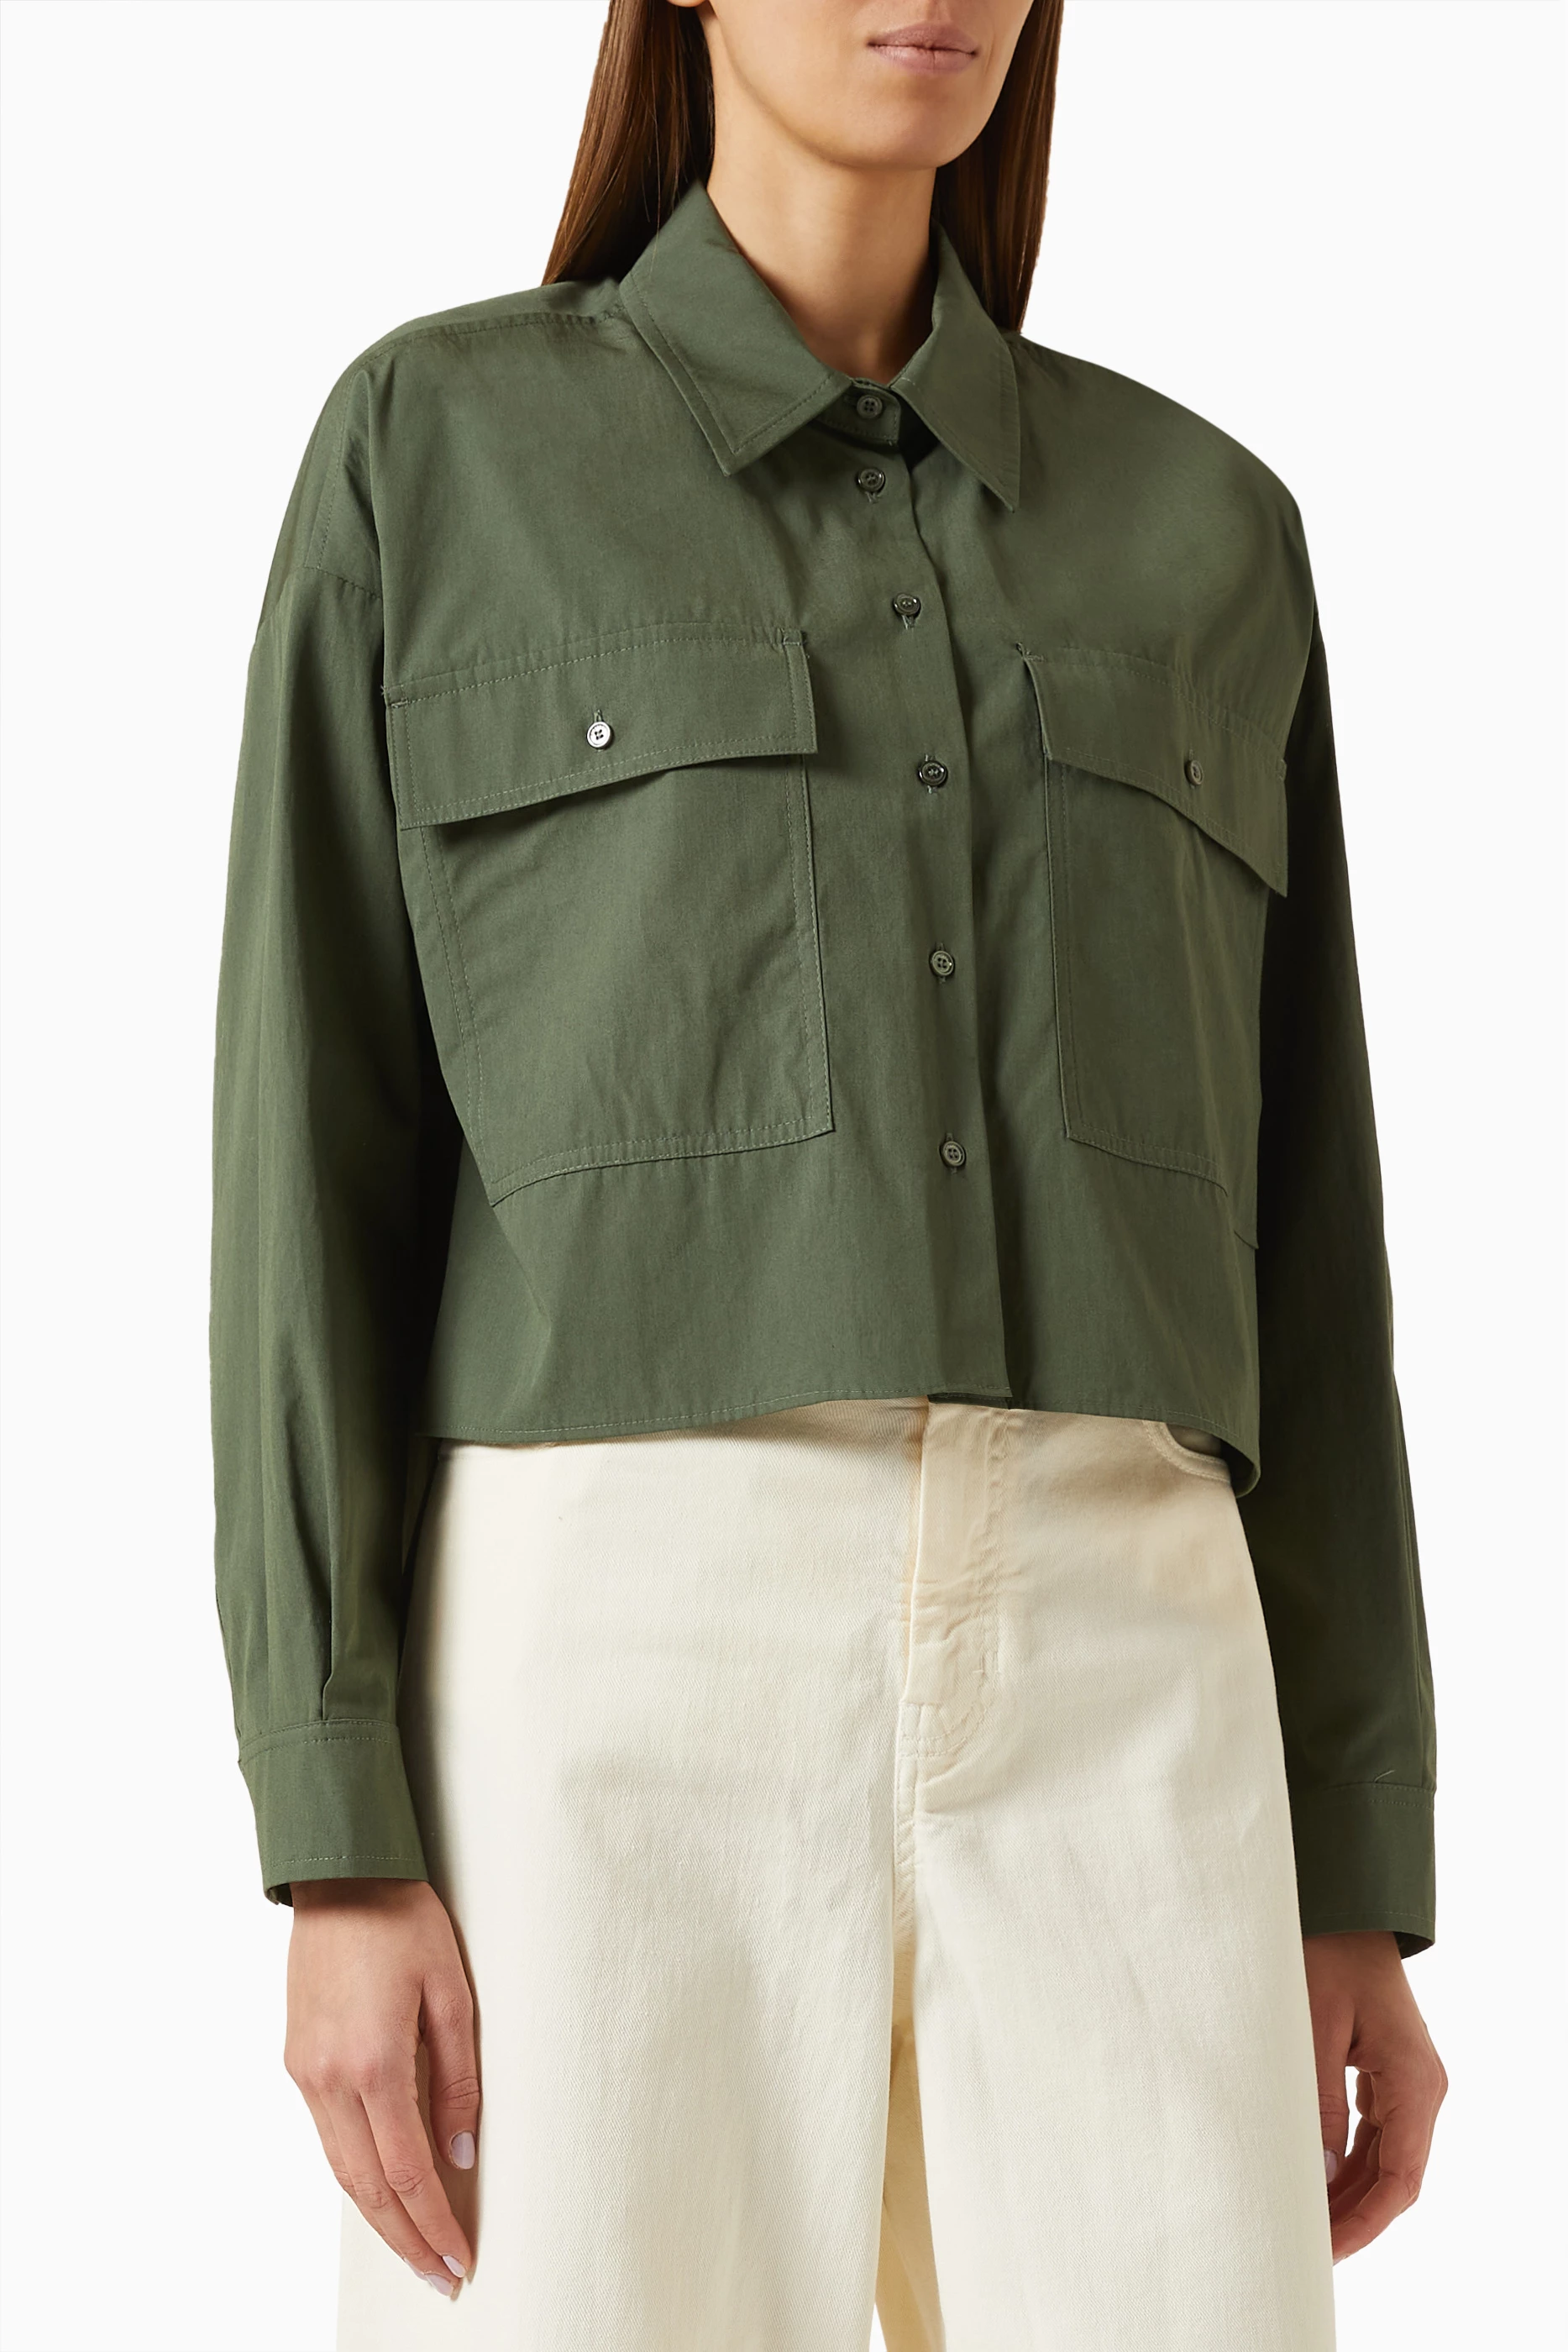 Buy Weekend Max Mara Green Carter Cropped Shirt in Cotton for